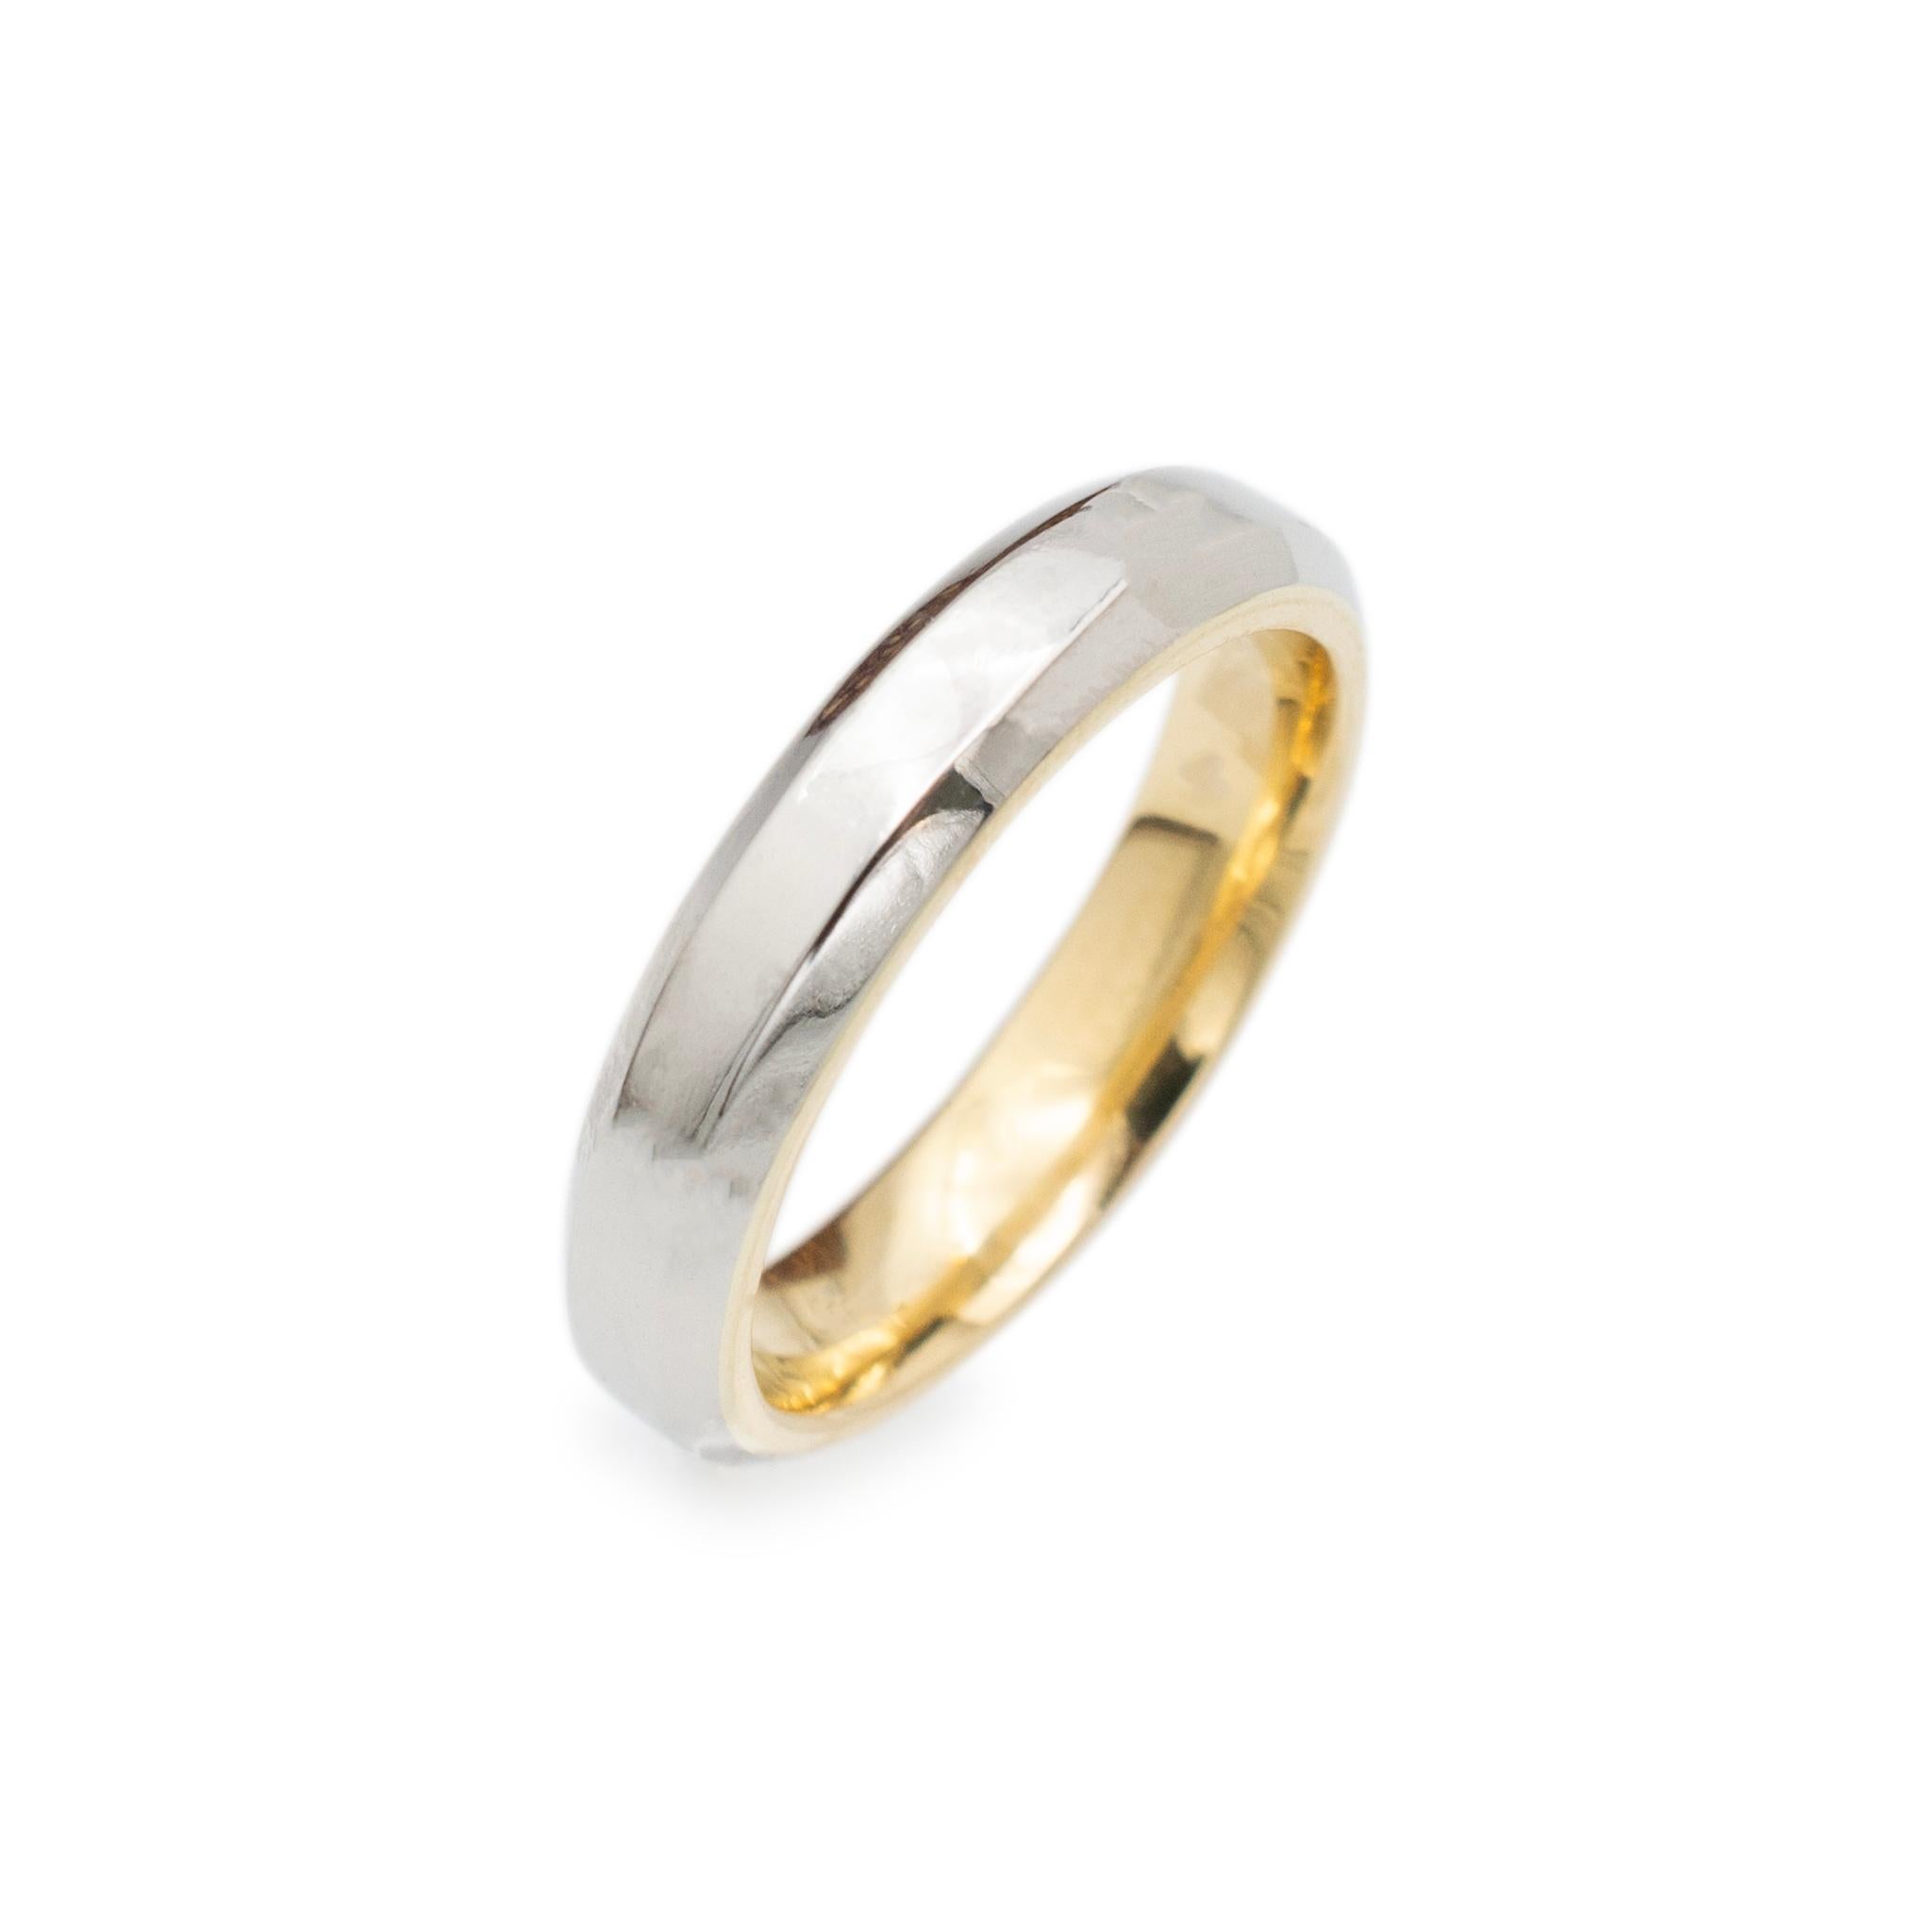 Metal Type: 18K Yellow Gold and 900 Platinum

Gender: Unisex

Size: 8

Width: 4.45 mm

Weight: 9.74 grams

18K yellow gold and 900 platinum, wedding band with a tapered, comfort-fit shank. Engraved with 